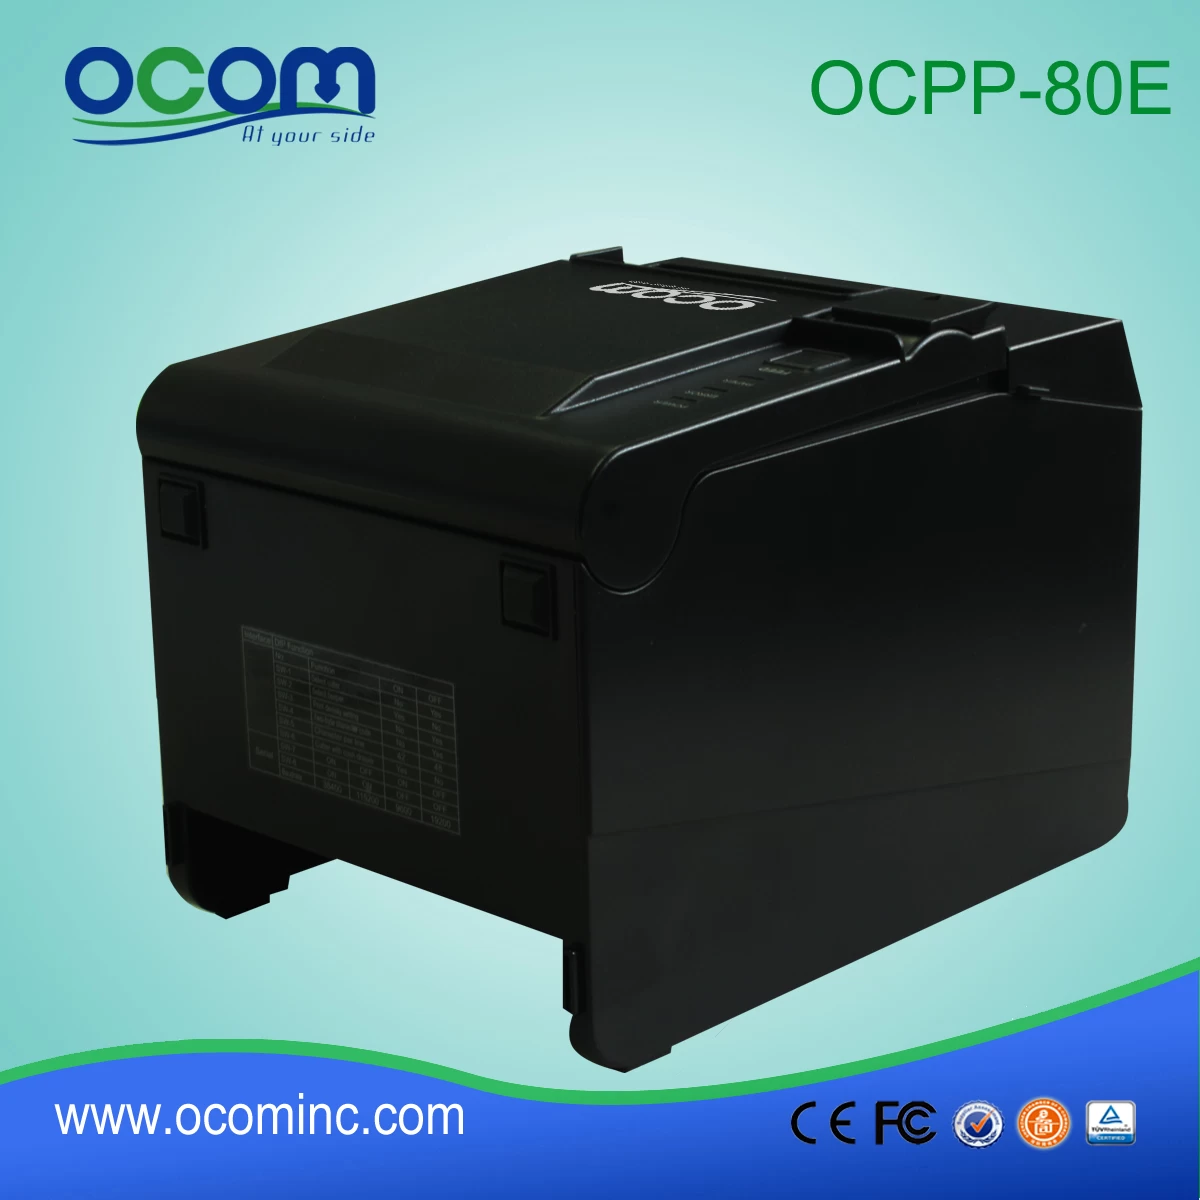 OCPP-80E---China low cost thermal receipt printer price